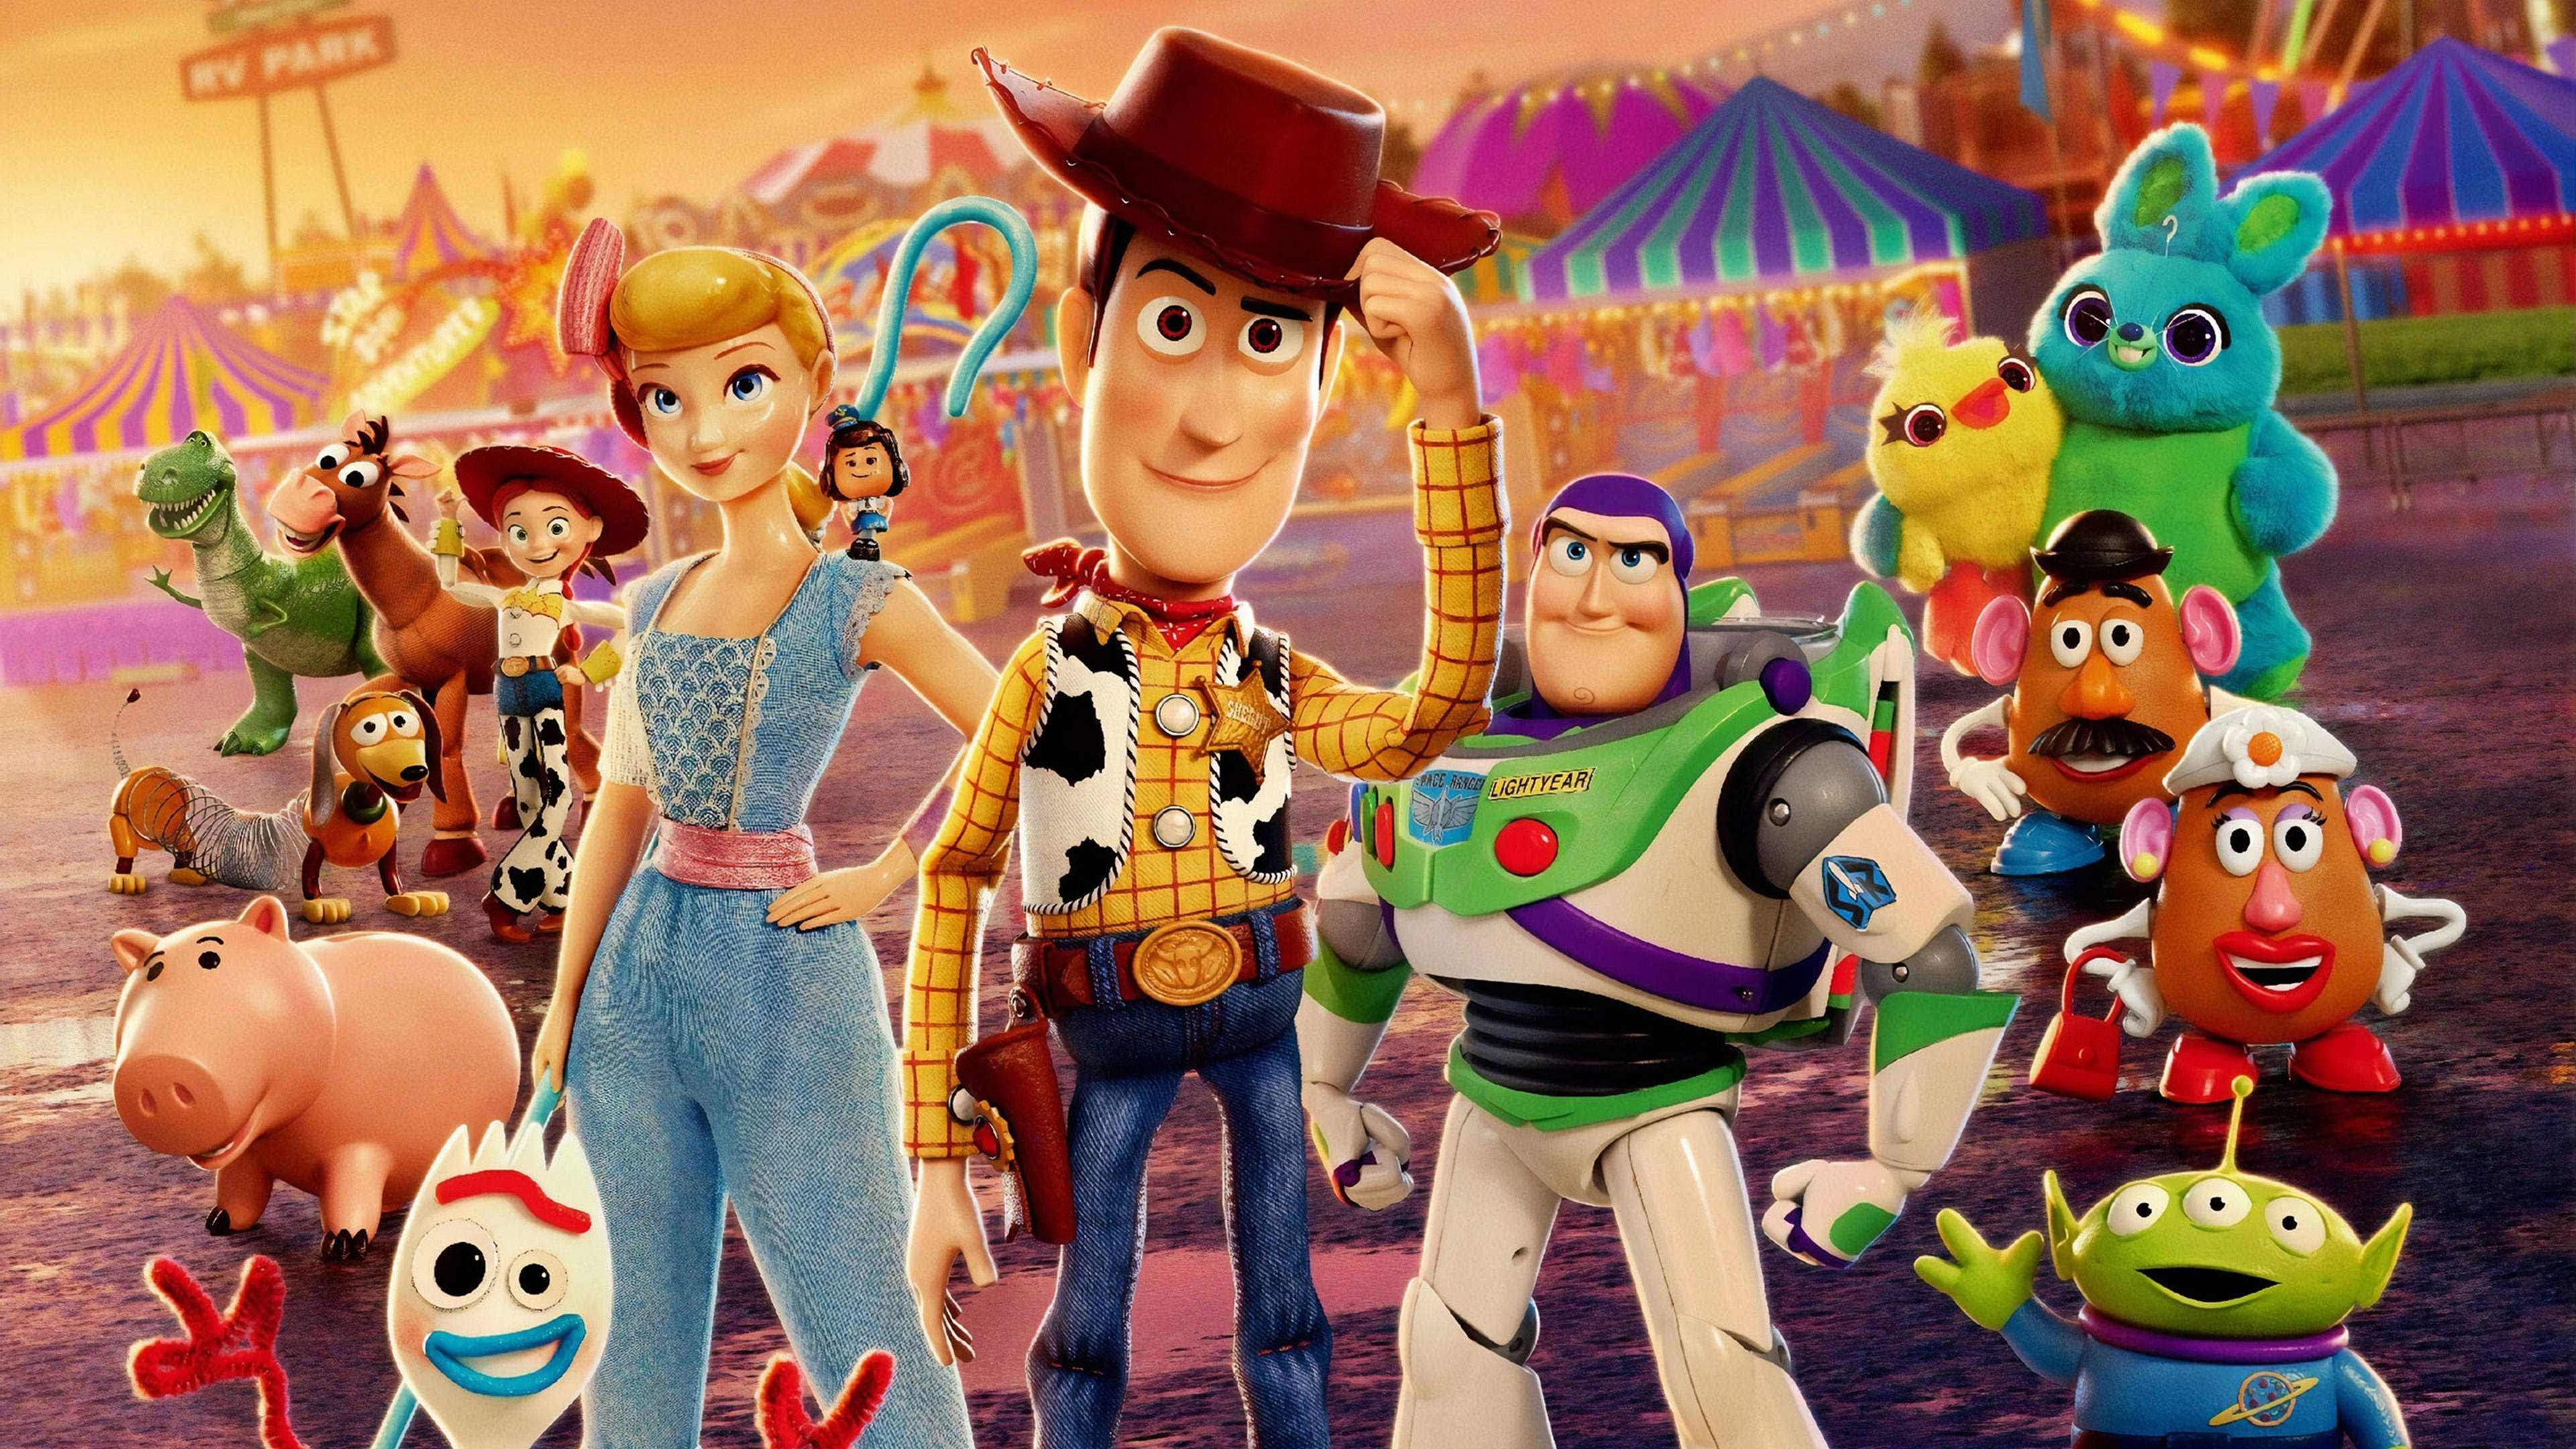 Toy Story 4 Wallpaper Background